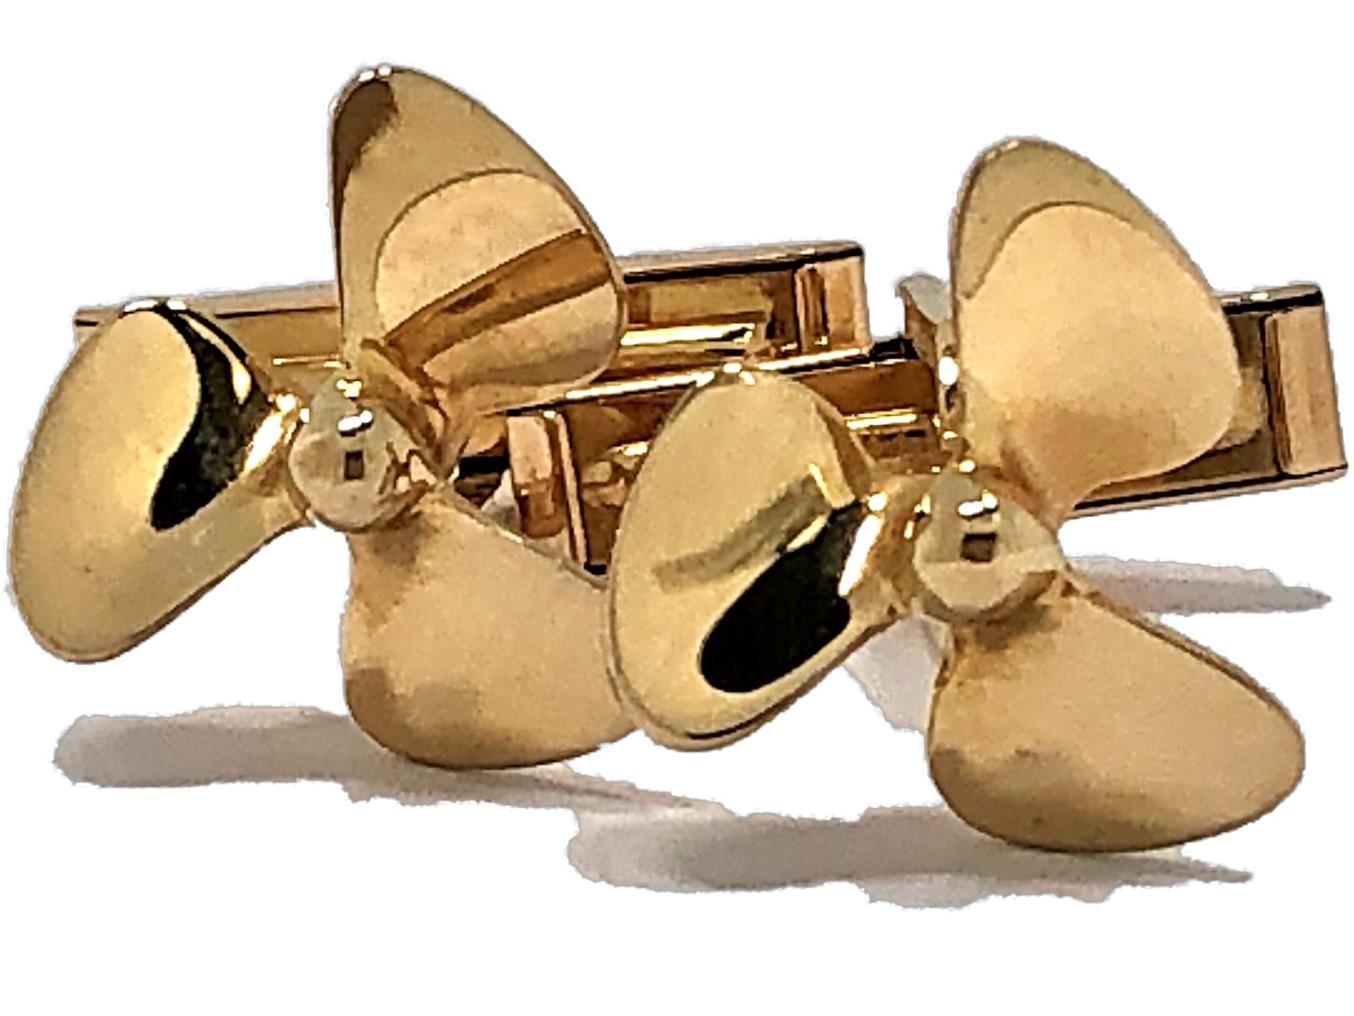 Made by Tiffany & Co, these 14K Yellow Gold Cufflinks in the shape of propellers are
ideal for any man who is an avid boater. The fold down backs make them easy to put on and to take off. Stamped TIFFANY & CO 585. The propellers measure 5/8 inch